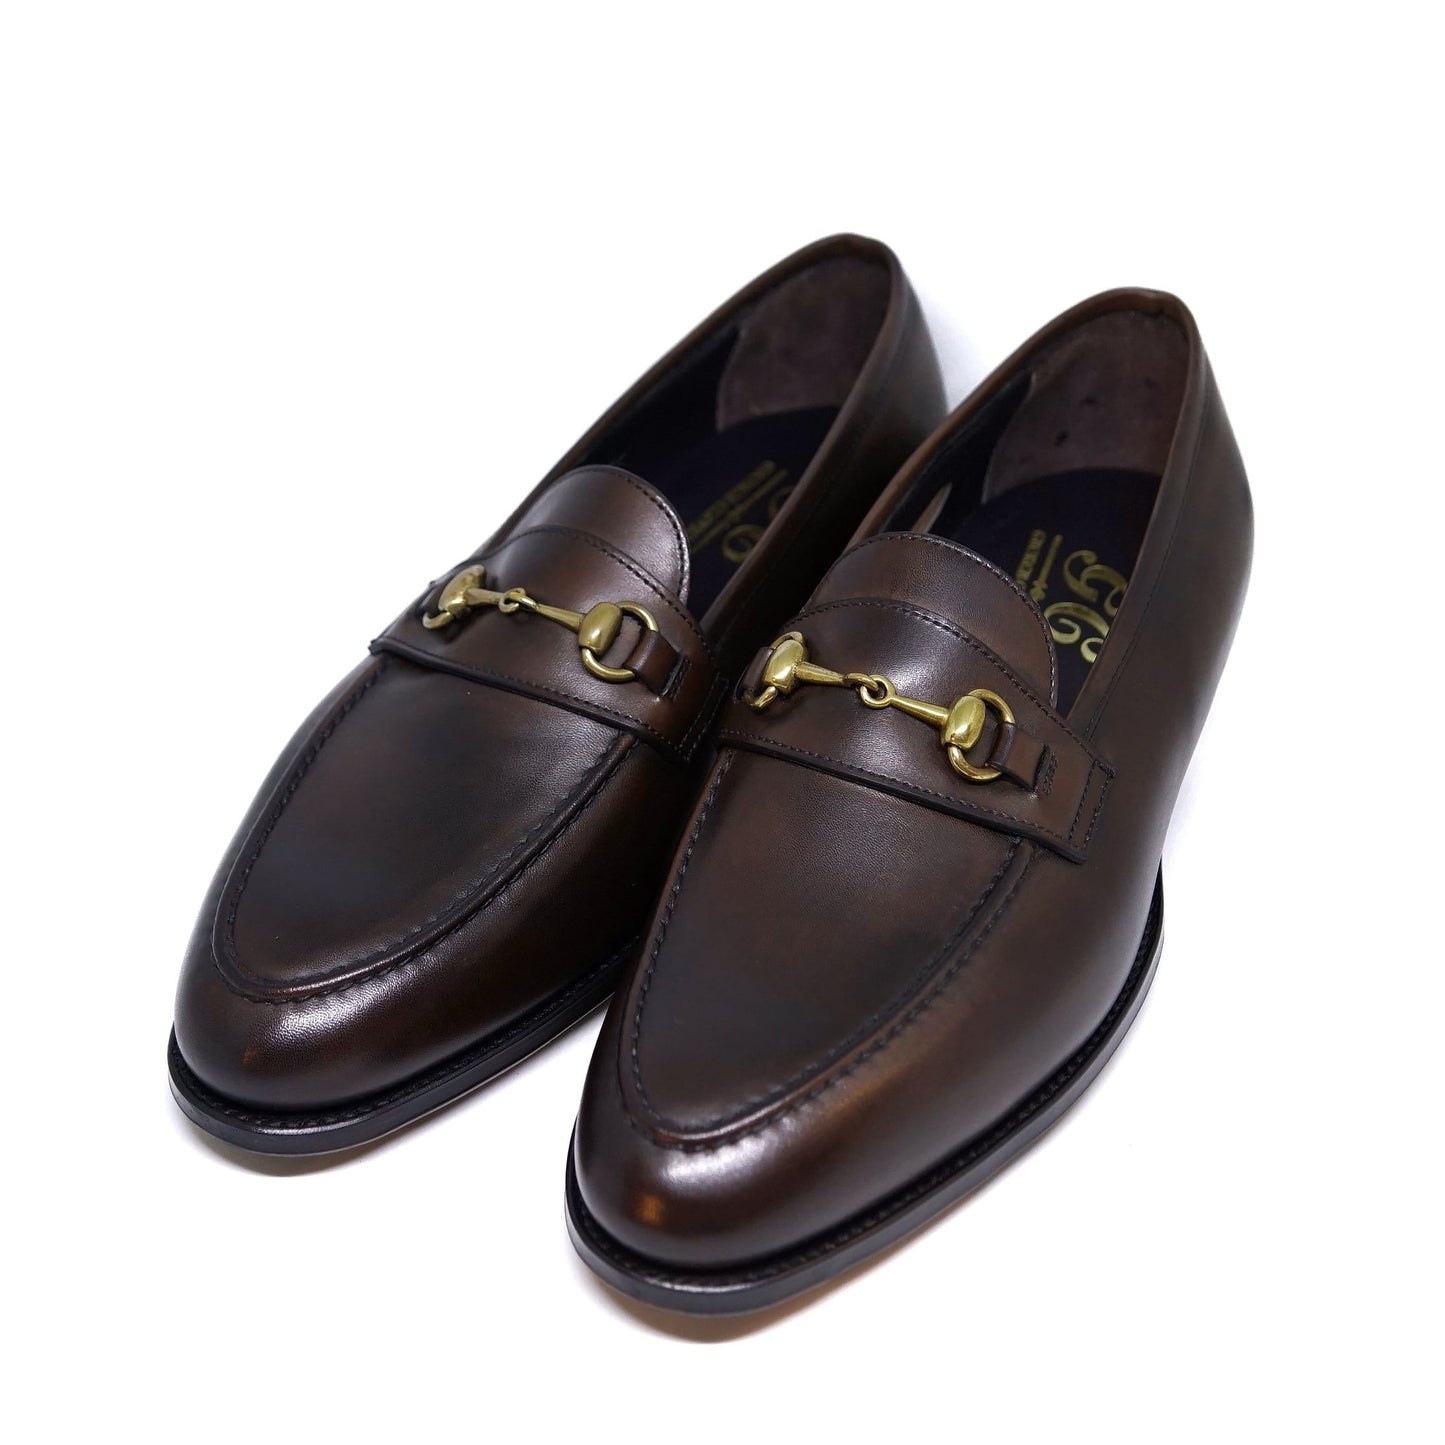 GEORGE CLEVERLEY / ”The Colony" ビットローファー / Dark Brown Antique